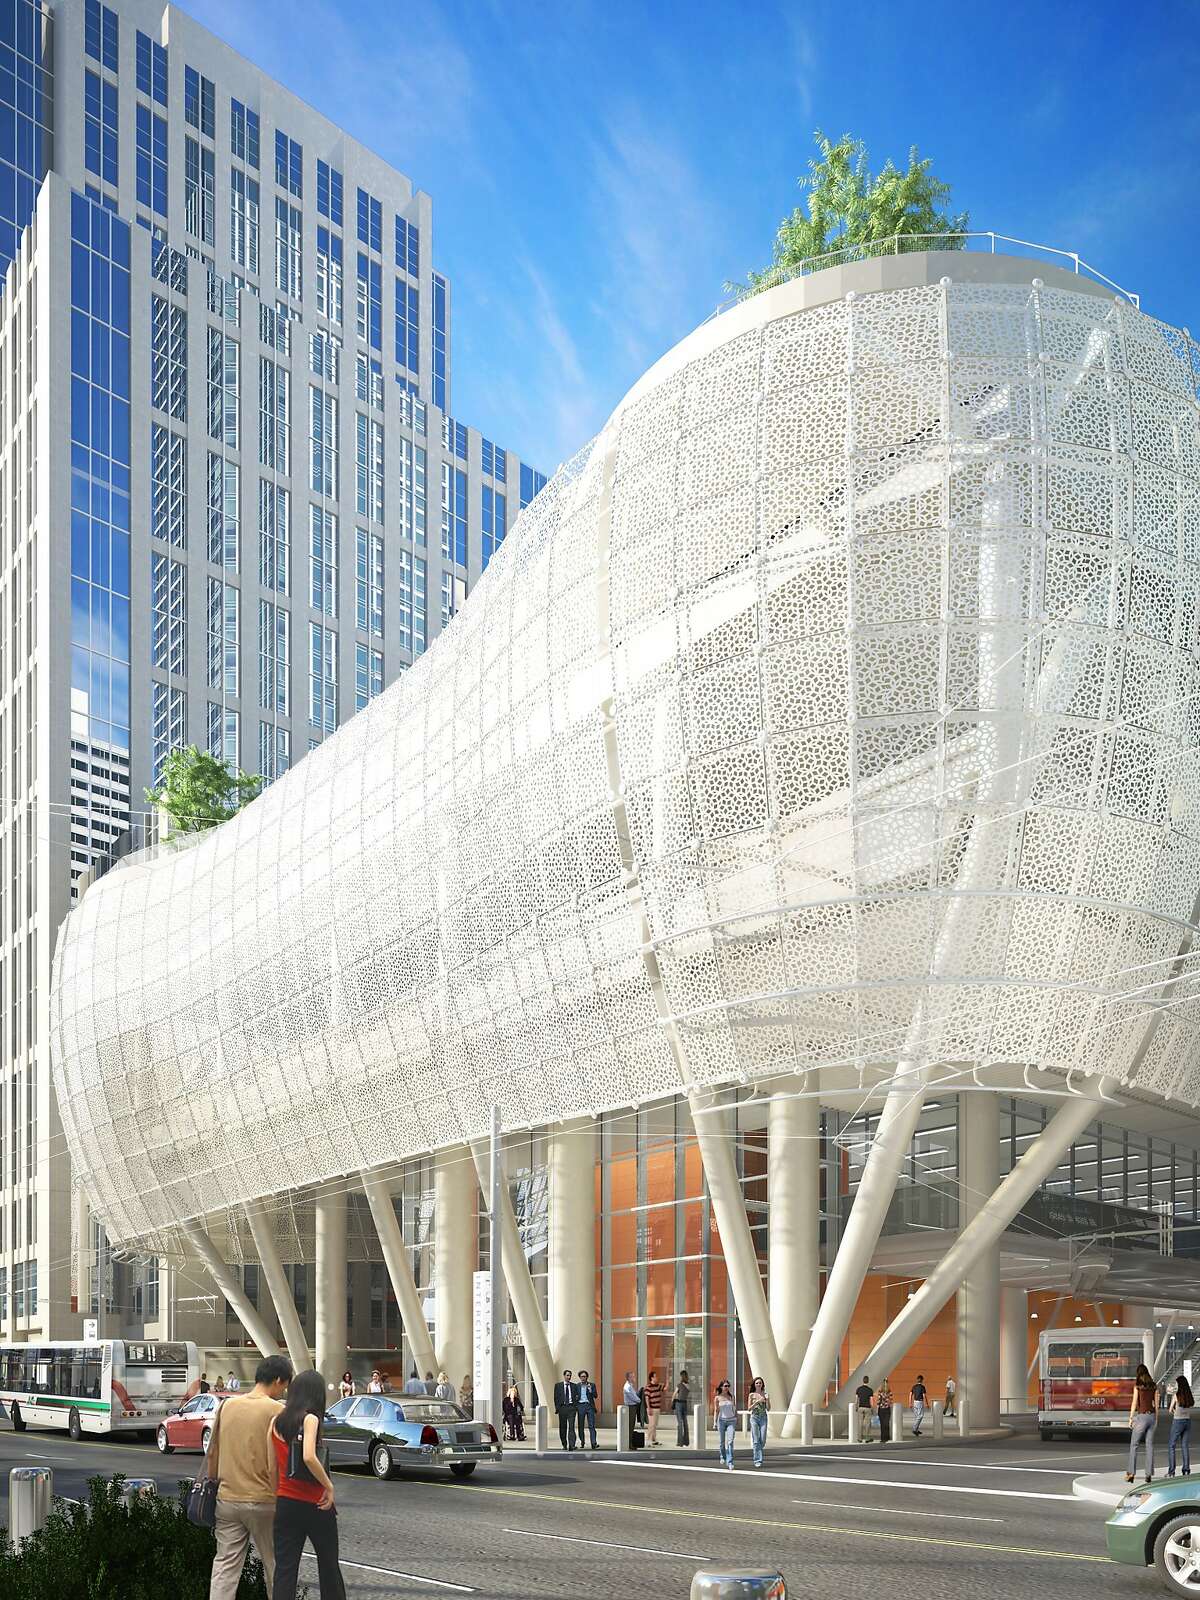 The final design -- as of July, 2015 -- of the exterior of the Transbay Transit Center, set to open in 2017.